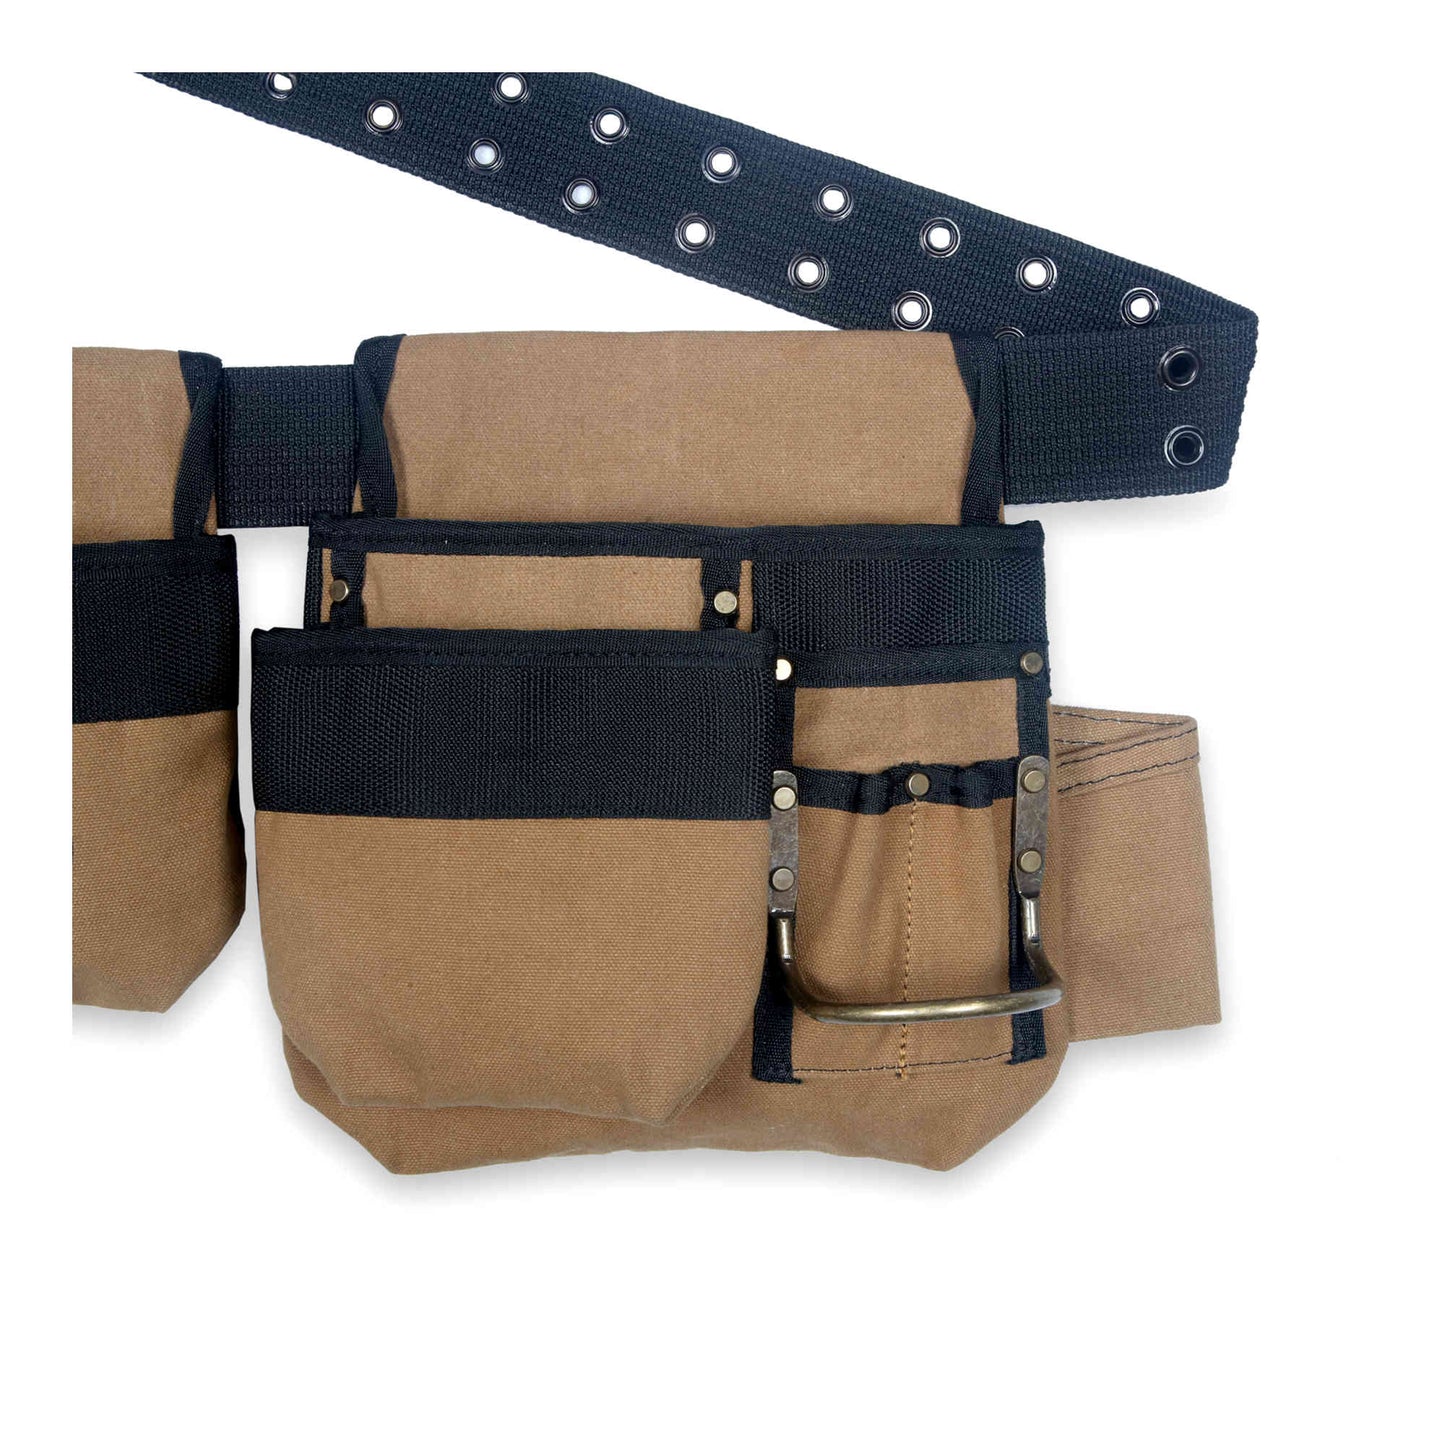 Style n Craft 97425 - 4 Piece 12 Pocket Carpenter's Tool Belt Combo in Brown Waterproof Canvas - Right Side Pouch showing the Pry Bar Holder - Front View